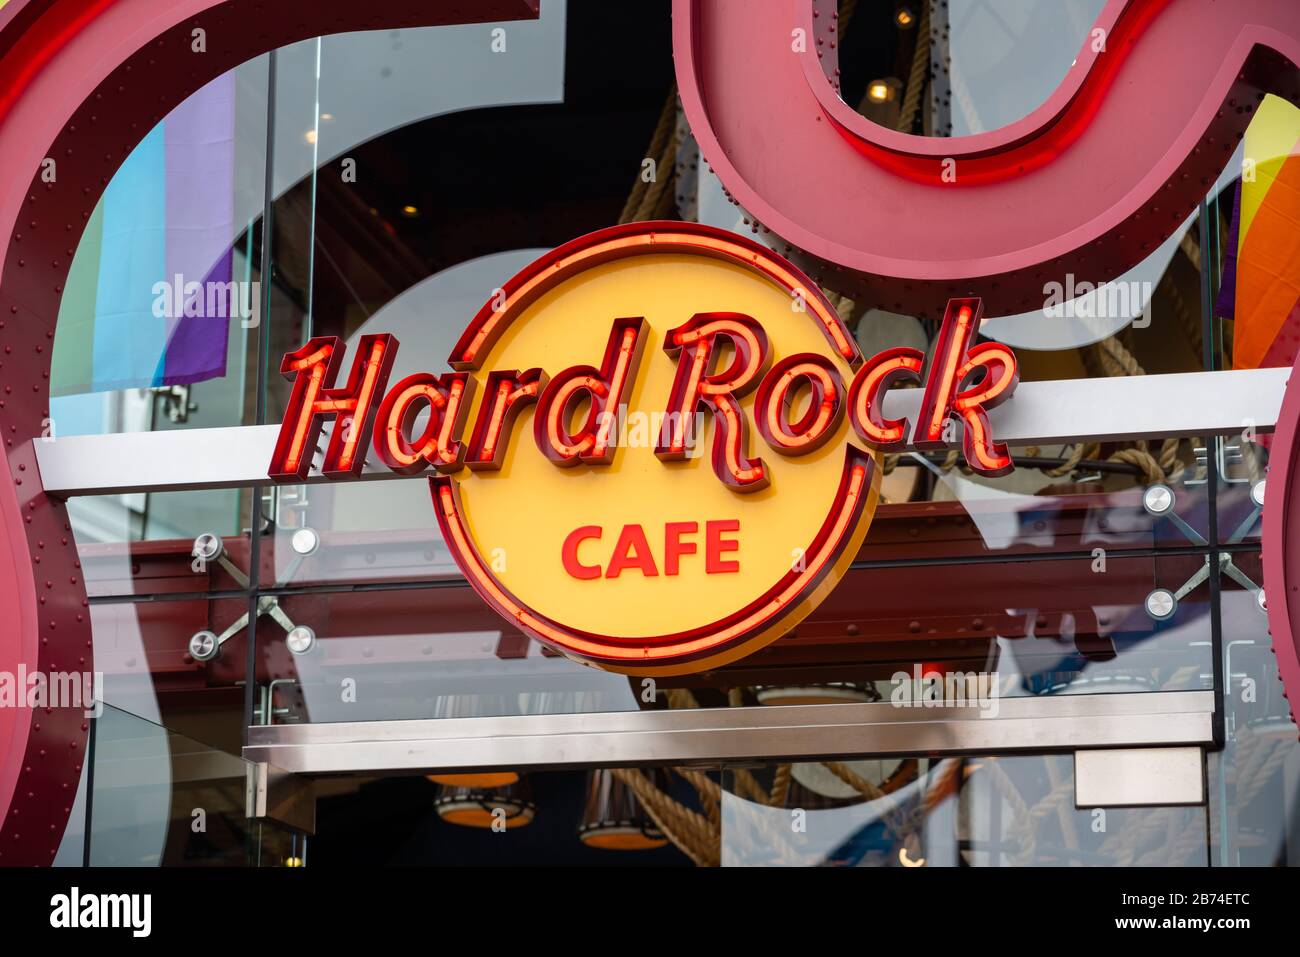 American chain of theme restaurants Hard Rock Cafe seen at a restaurant. Stock Photo